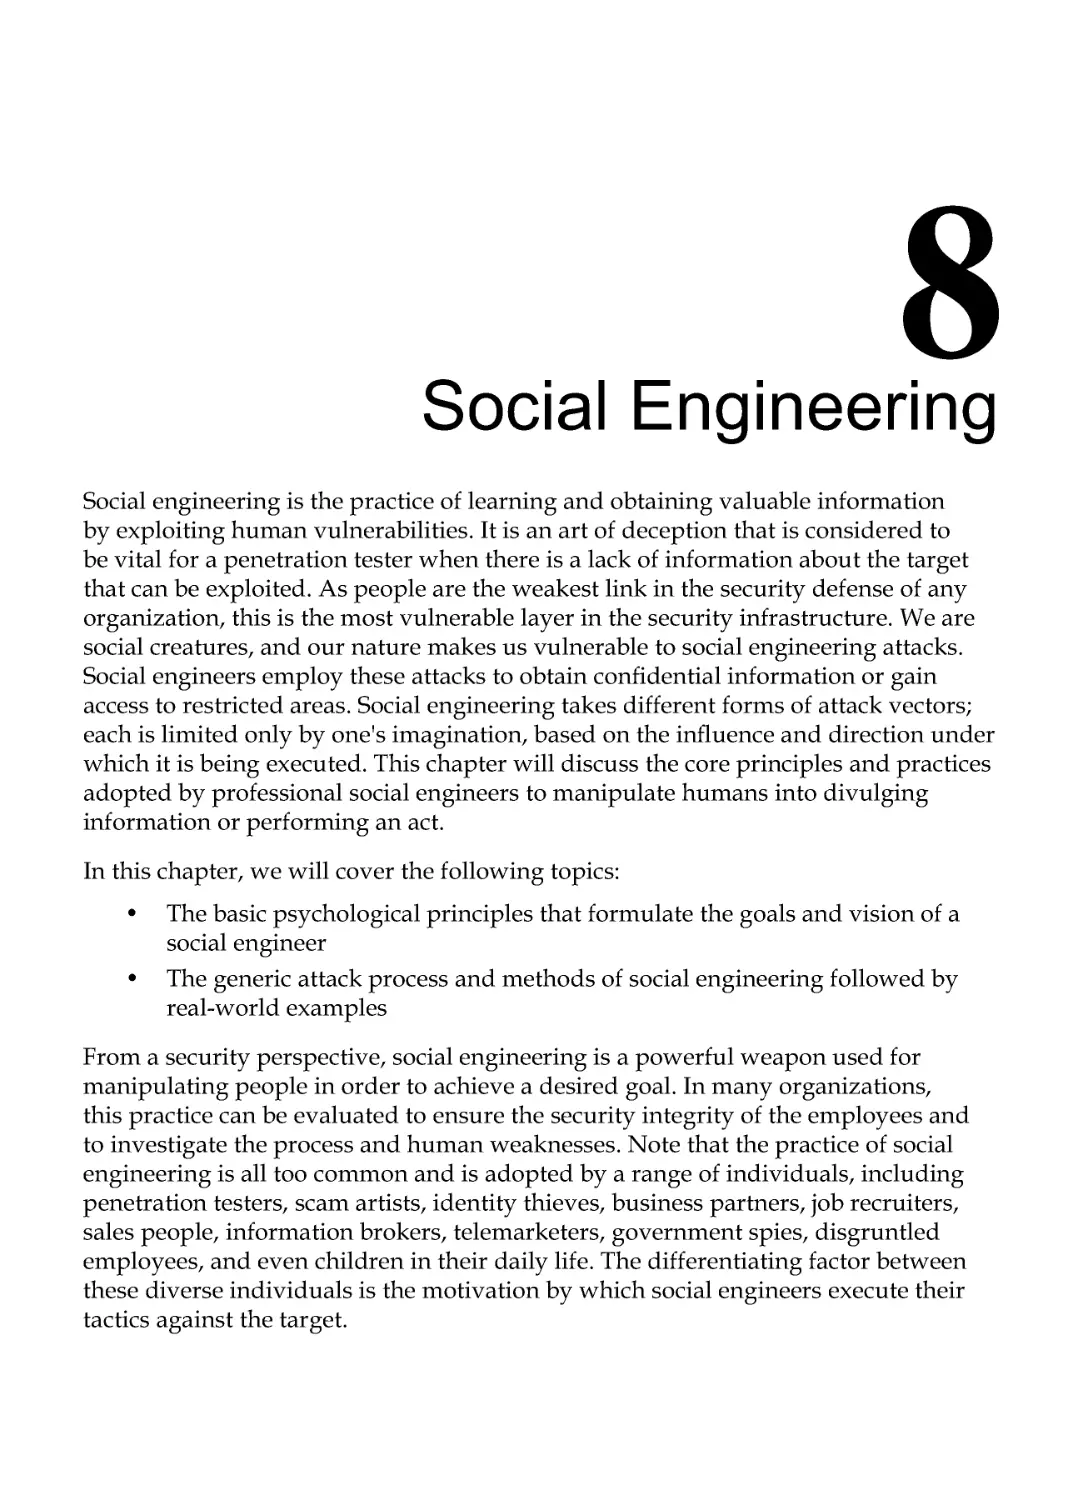 Chapter 8: Social Engineering